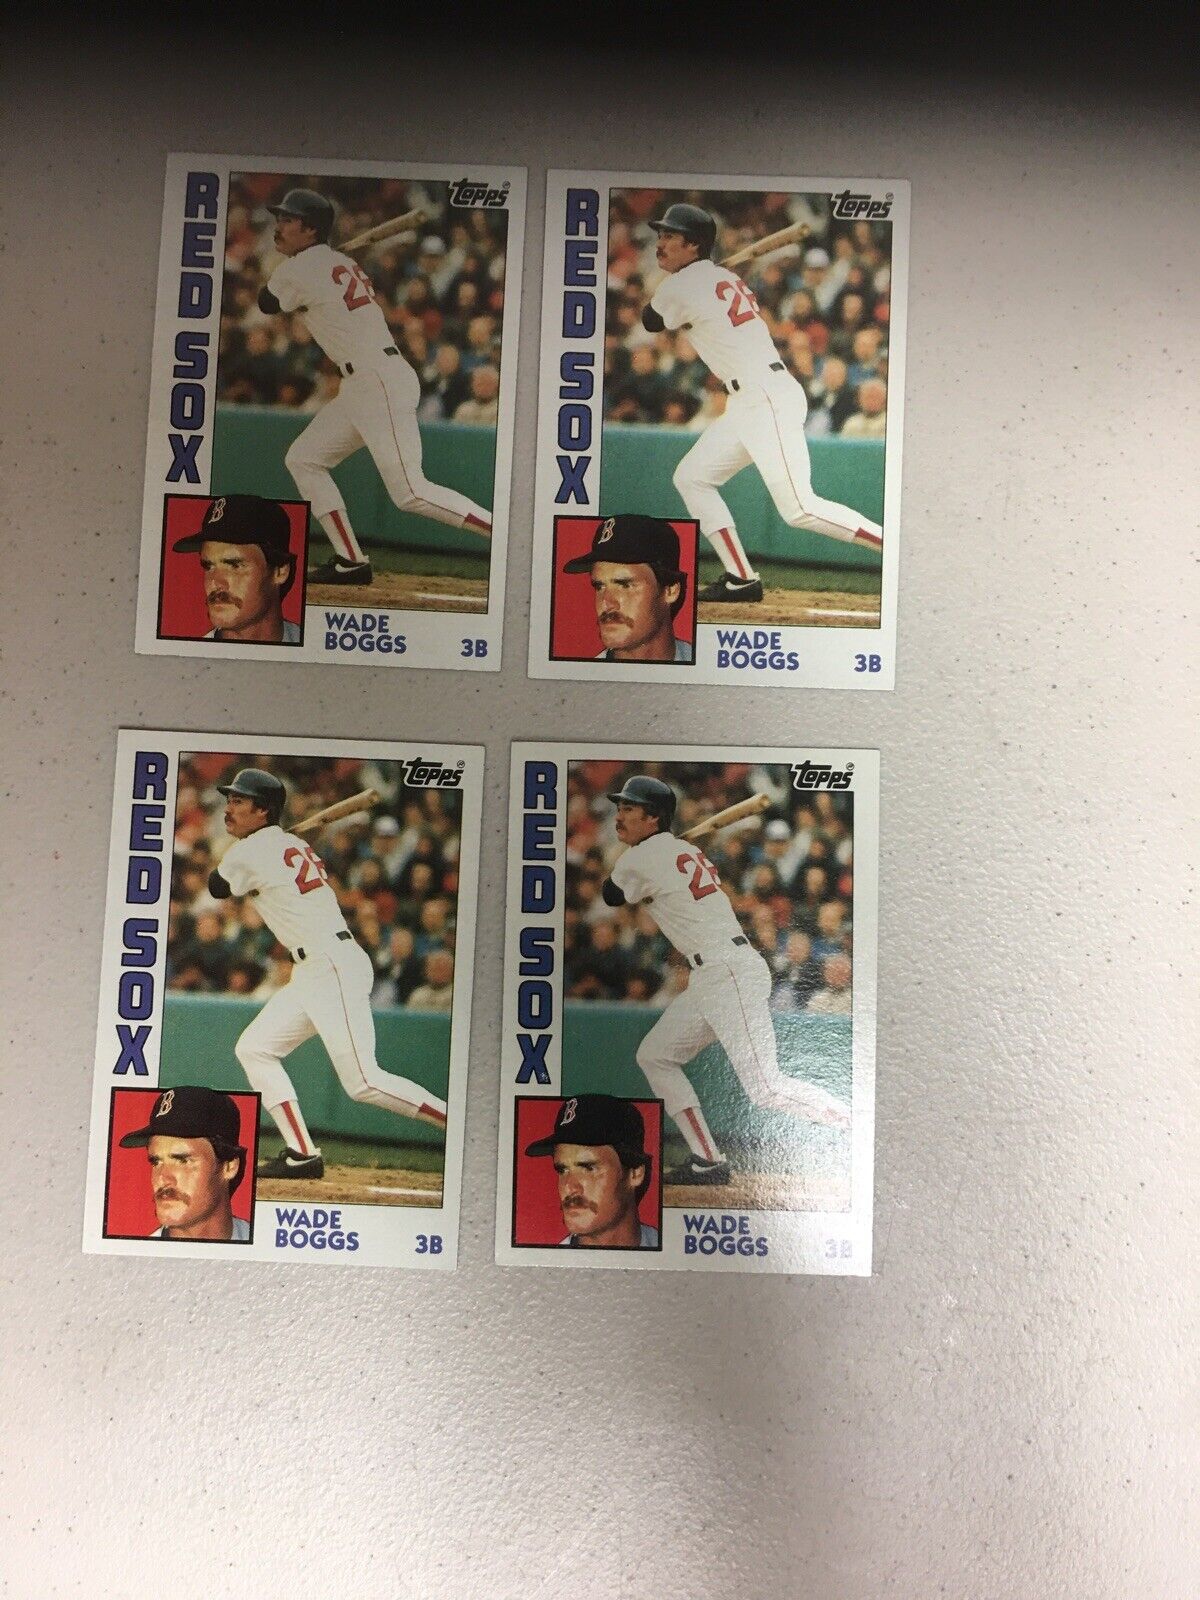 1984 Topps Baseball  4 Card Lot of Wade Boggs Card # 30  Ready For Grading